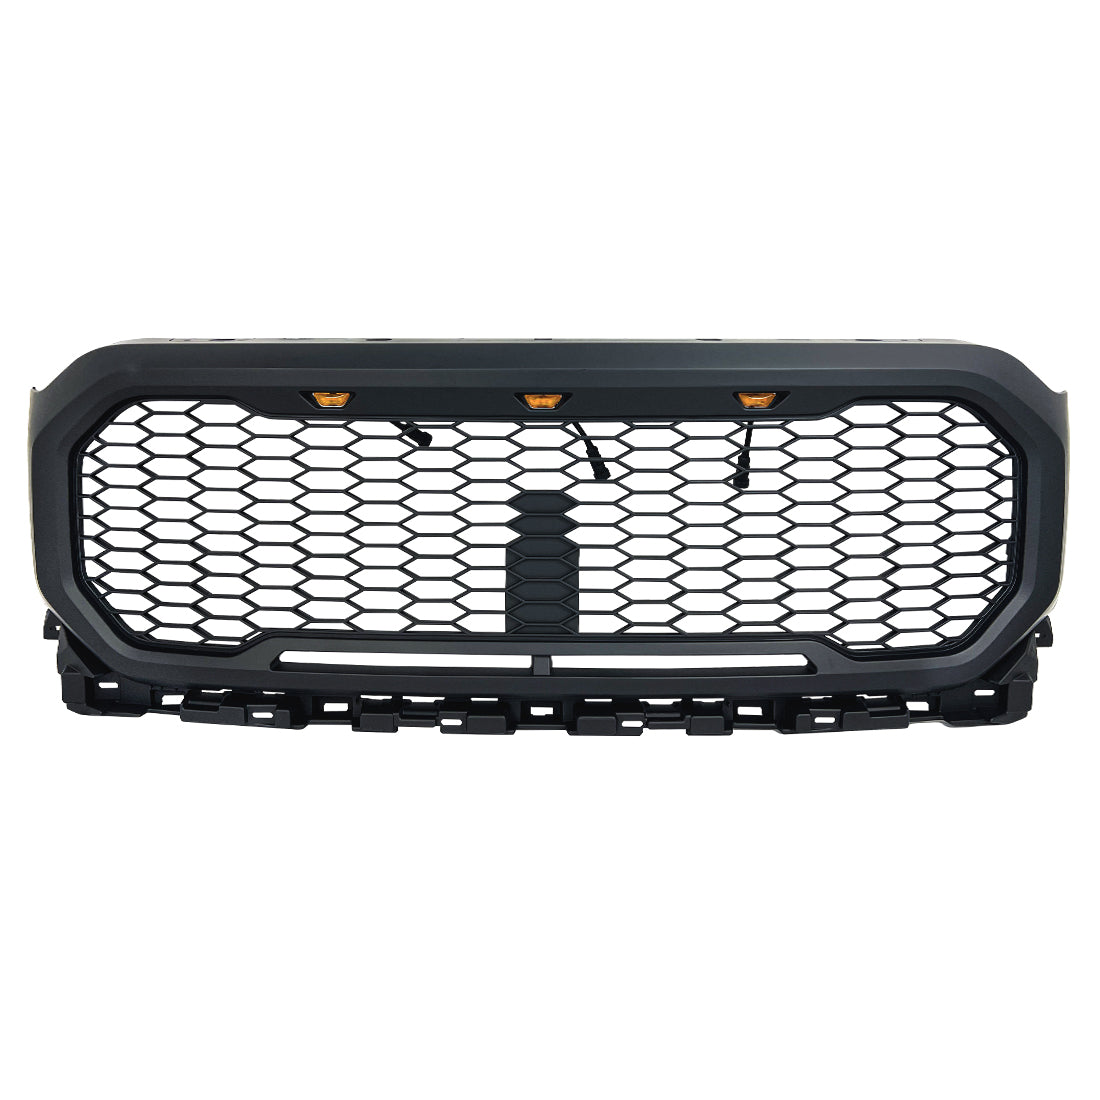 Raptor Style Front Mesh Grille W/3 Amber Lights-Matte Black For 2021-2022 Ford F150丨Amoffroad